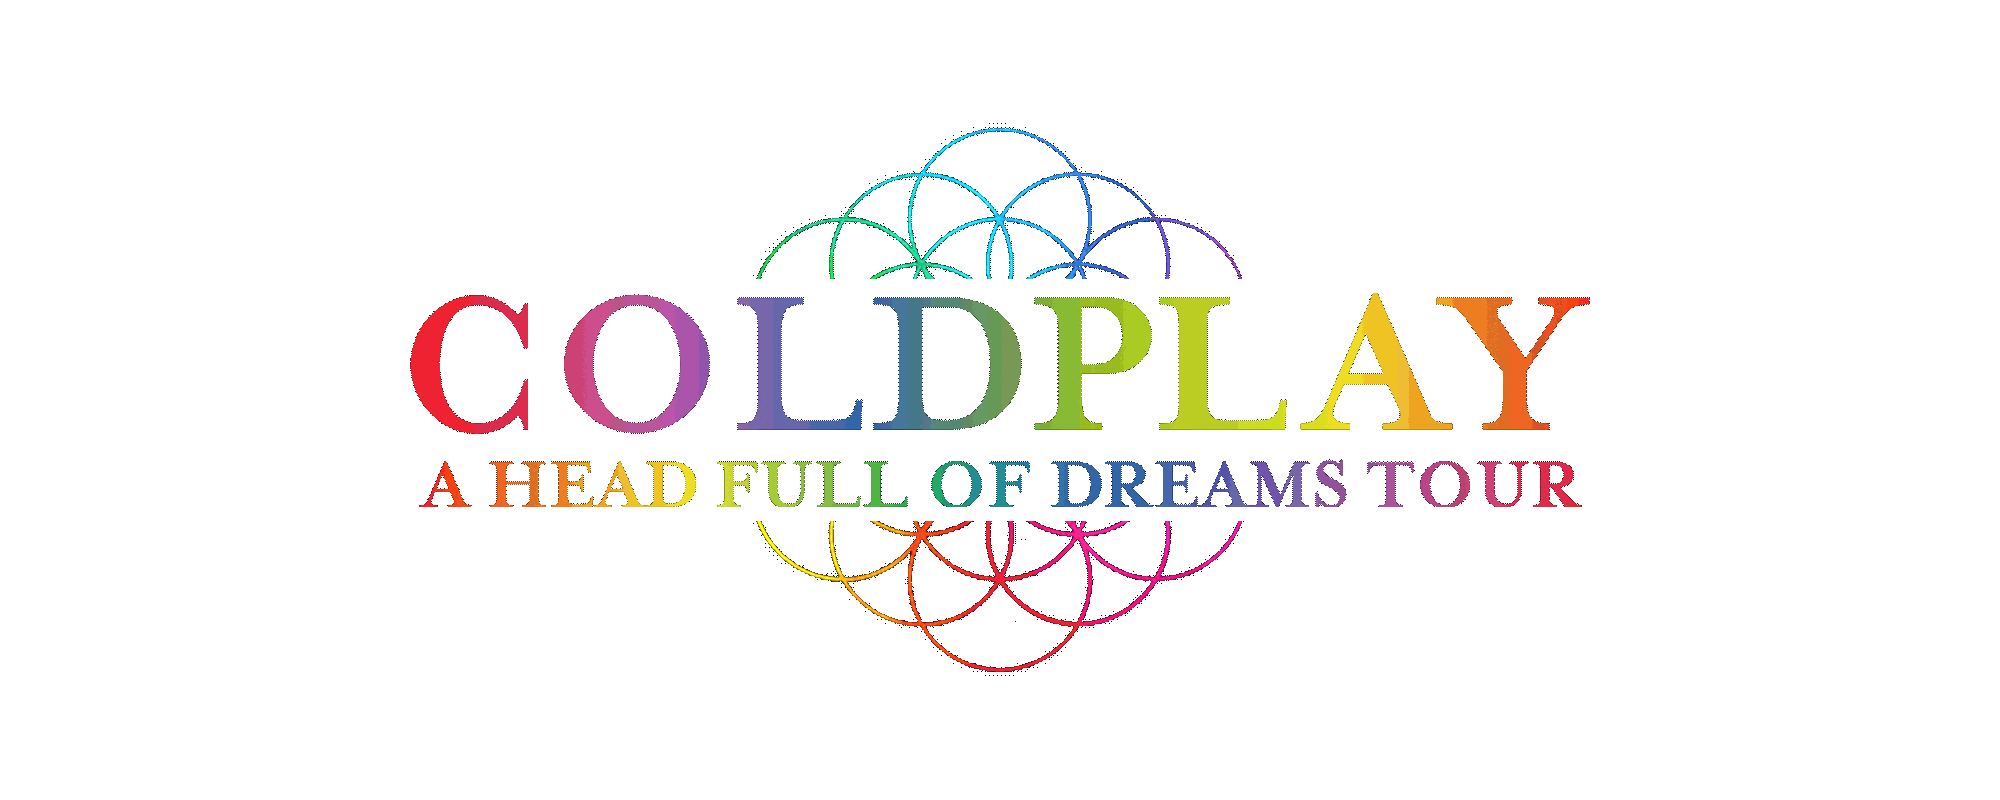 Coldplay Logo - Coldplay 2016 Tour | coldplay